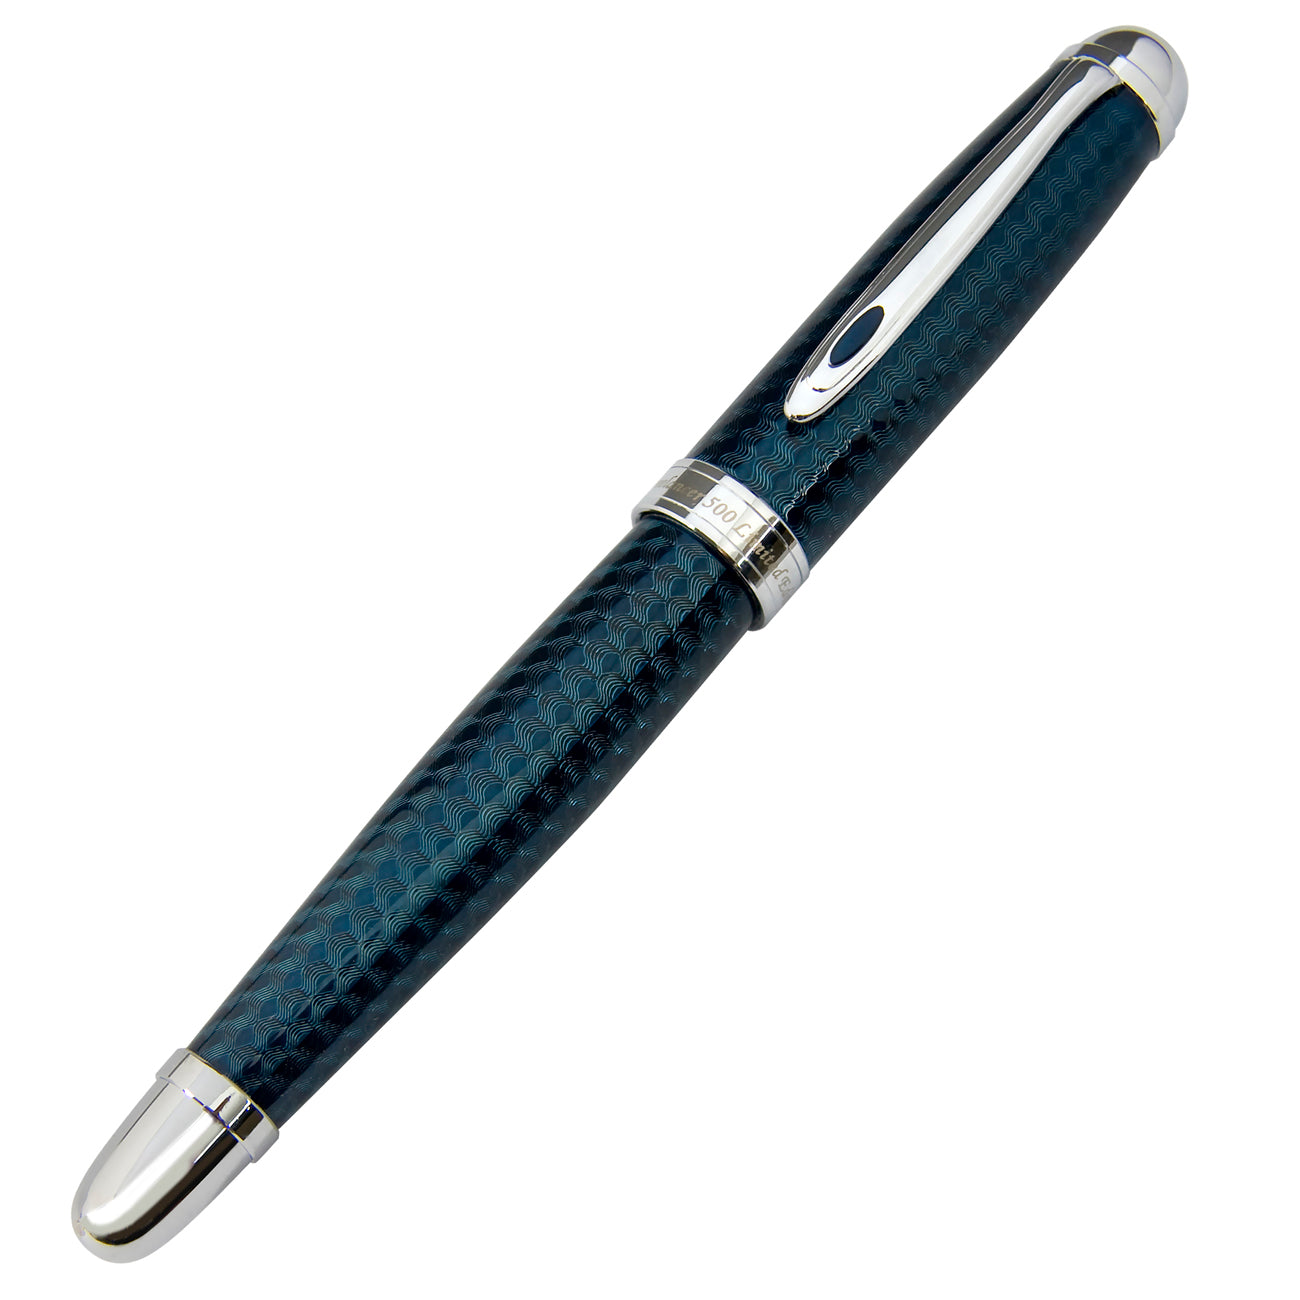 Xezo - Front angled view of the capped Freelancer Blue F fountain pen